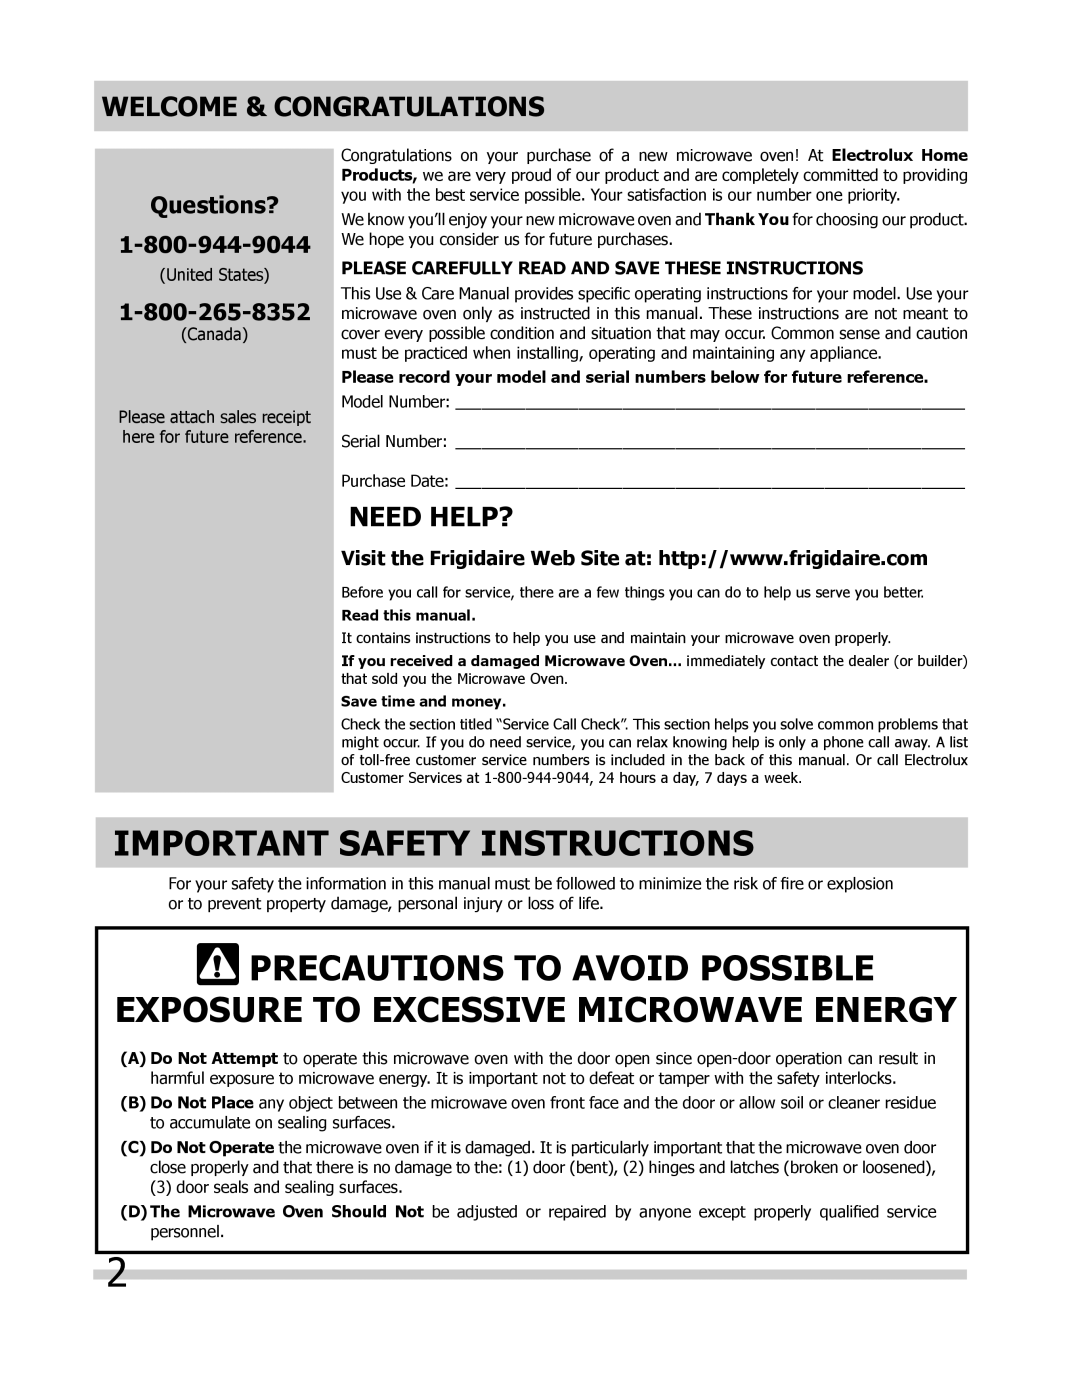 Frigidaire CGMO205 Important Safety Instructions, Precautions To Avoid Possible Exposure To Excessive Microwave Energy 